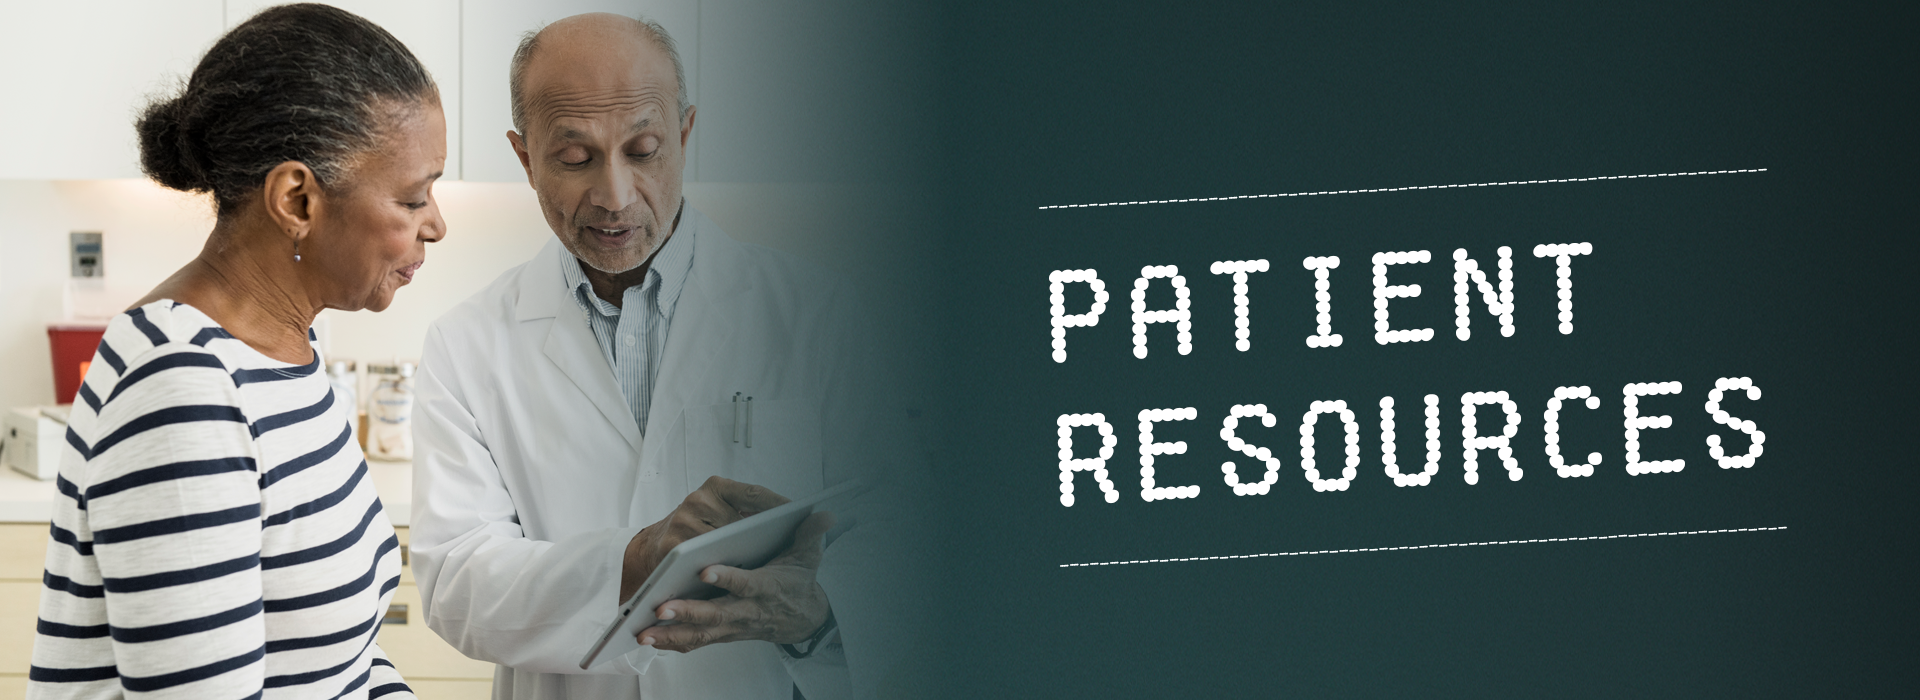 Image of a doctor showing a patient information on an ipad. Patient resources.